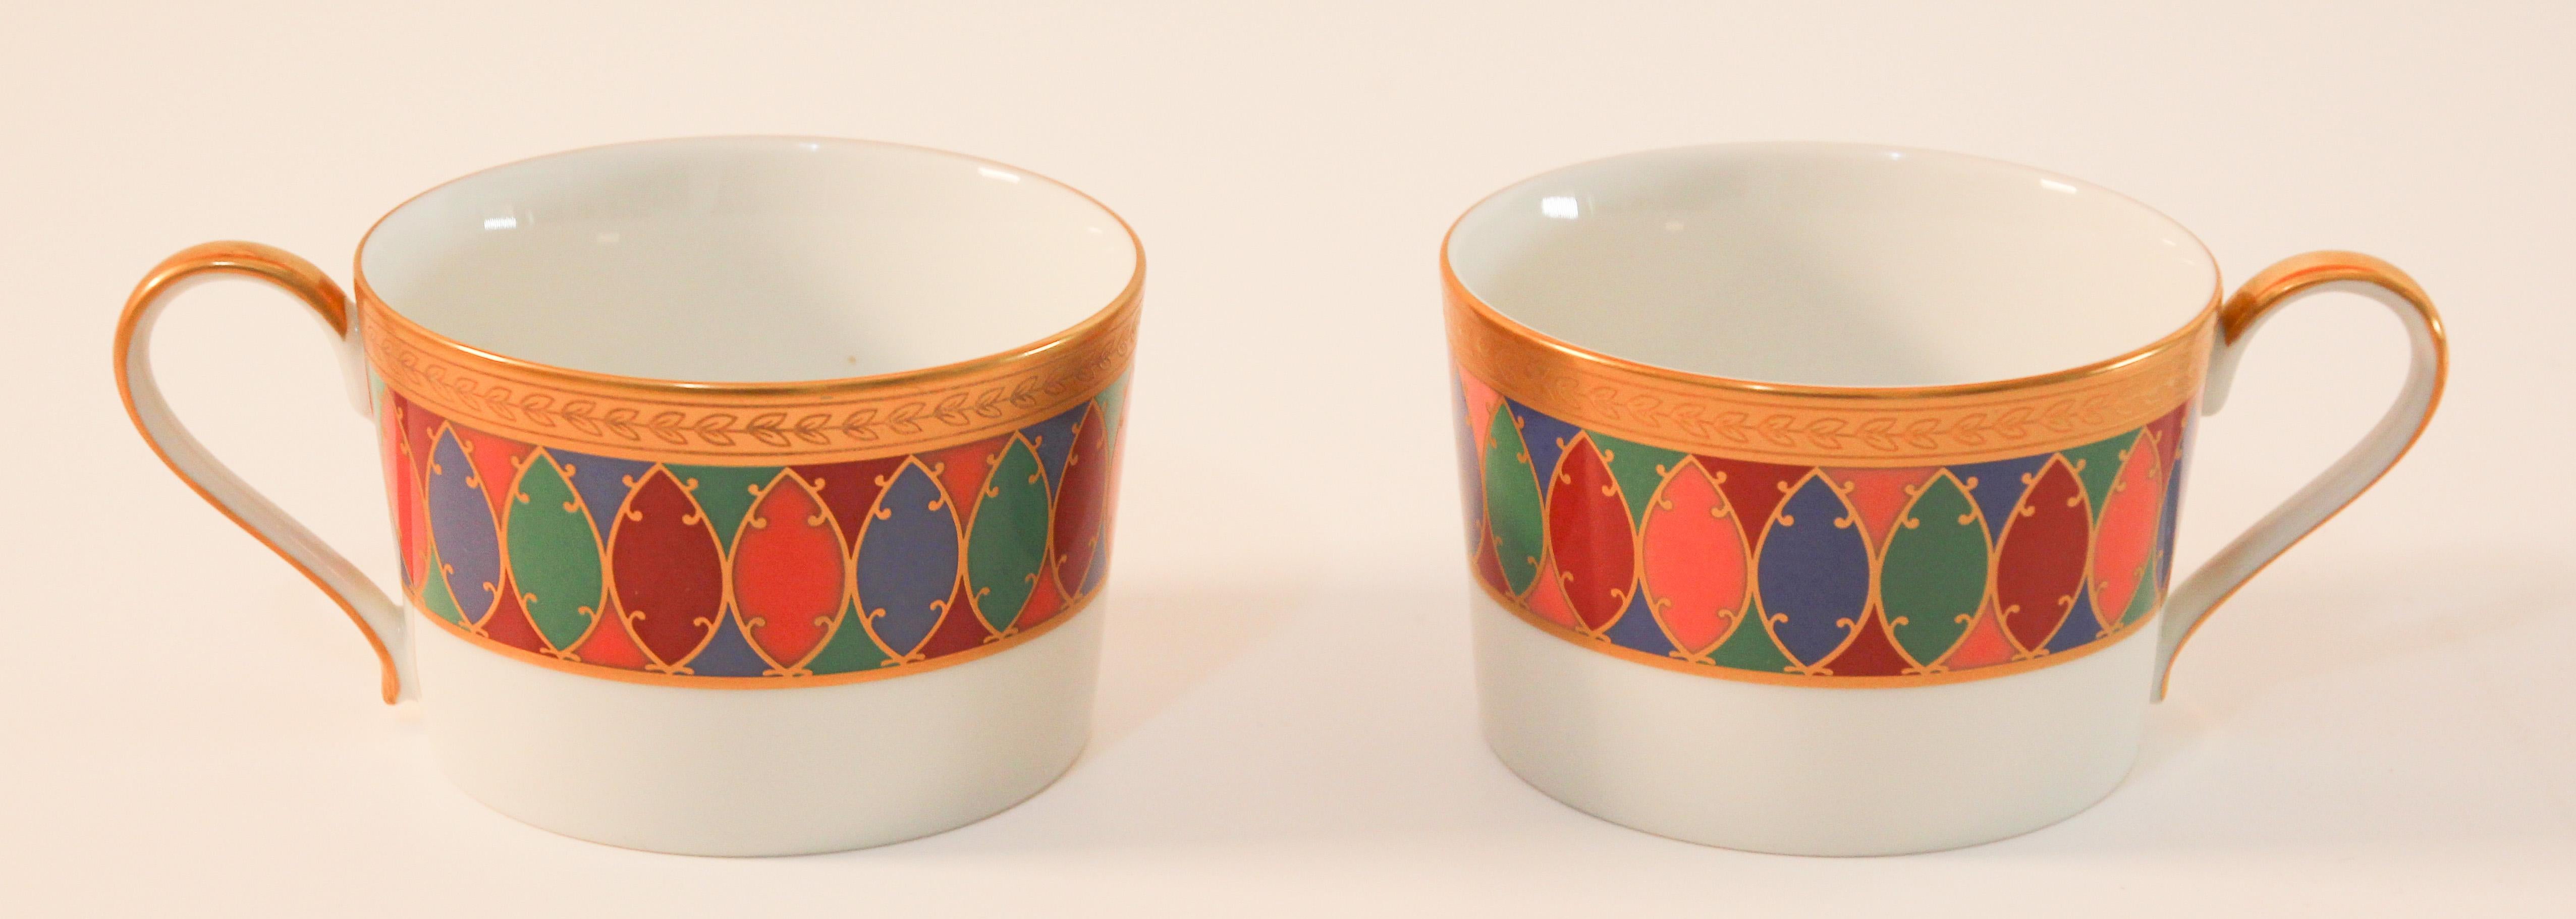 Set of Two Faberge Porcelain Tea, Coffee Cups 3